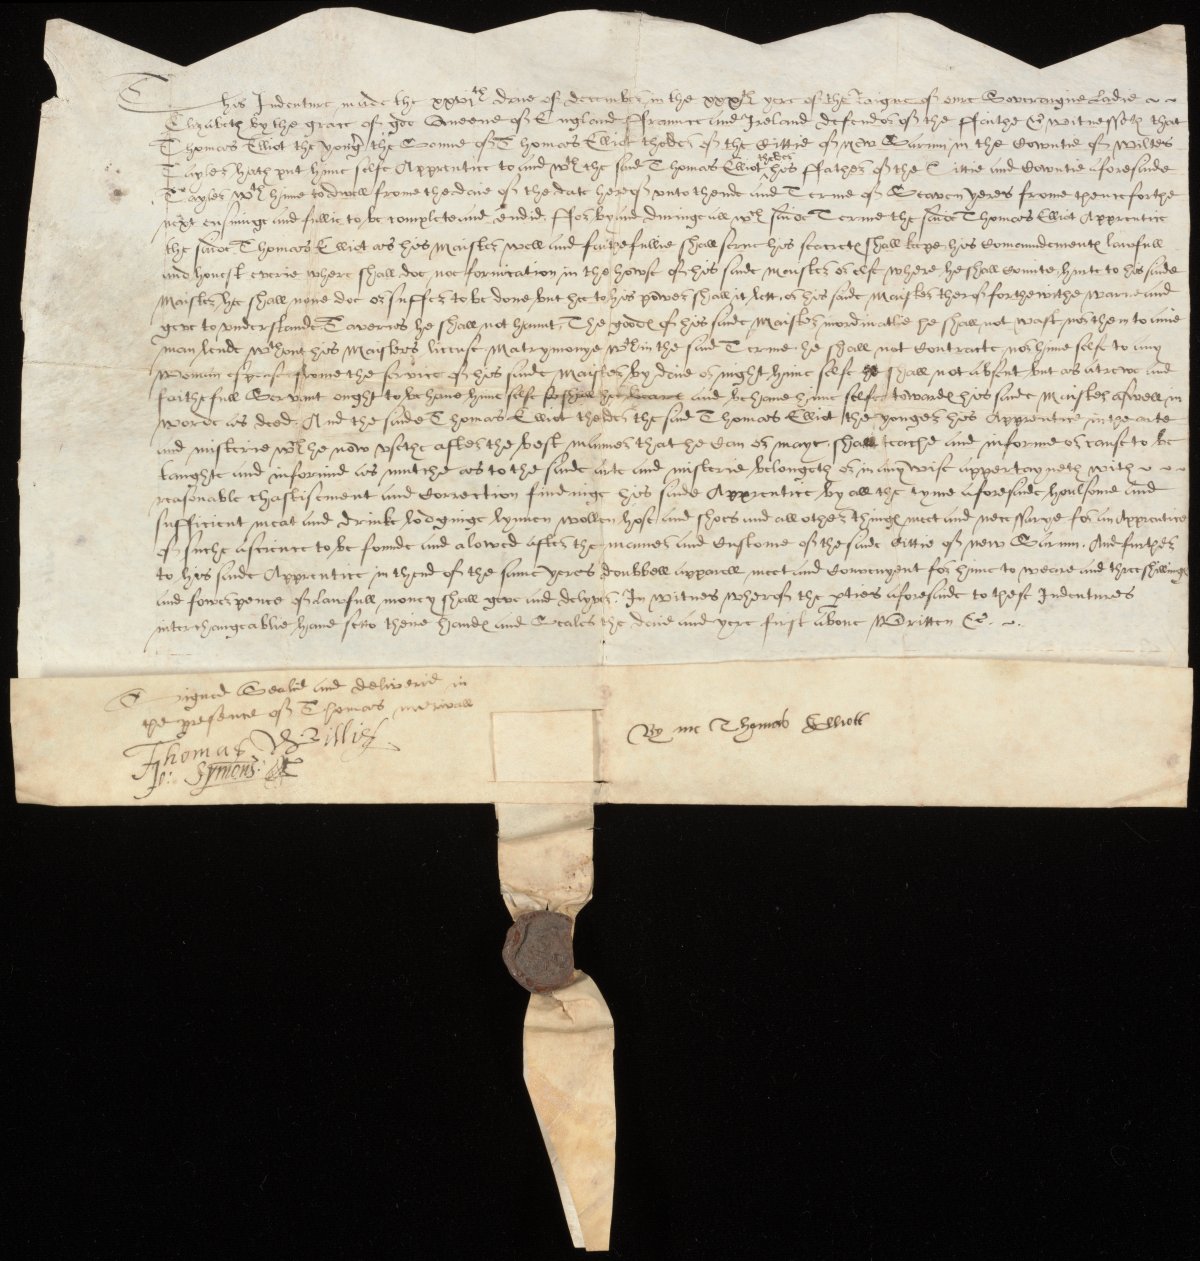 A handwritten contract. The top edge of the document is cut in a zig-zag manner. The bottom edge is folded once and a tail/strip of paper hangs off it. In the middle of the strip is a red wax seal with a crest on it.